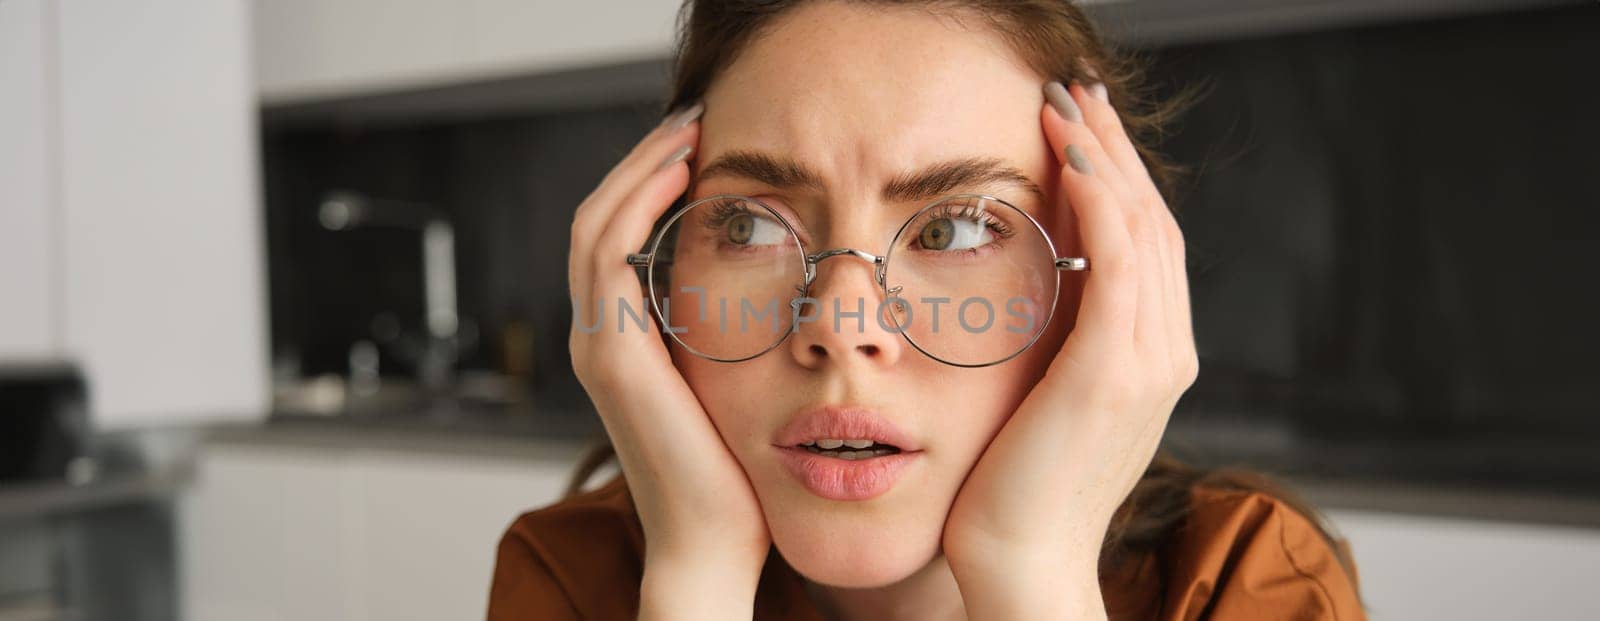 Portrait of woman thinking about something concerning, wearing glasses, touching head, sitting troubled at home.